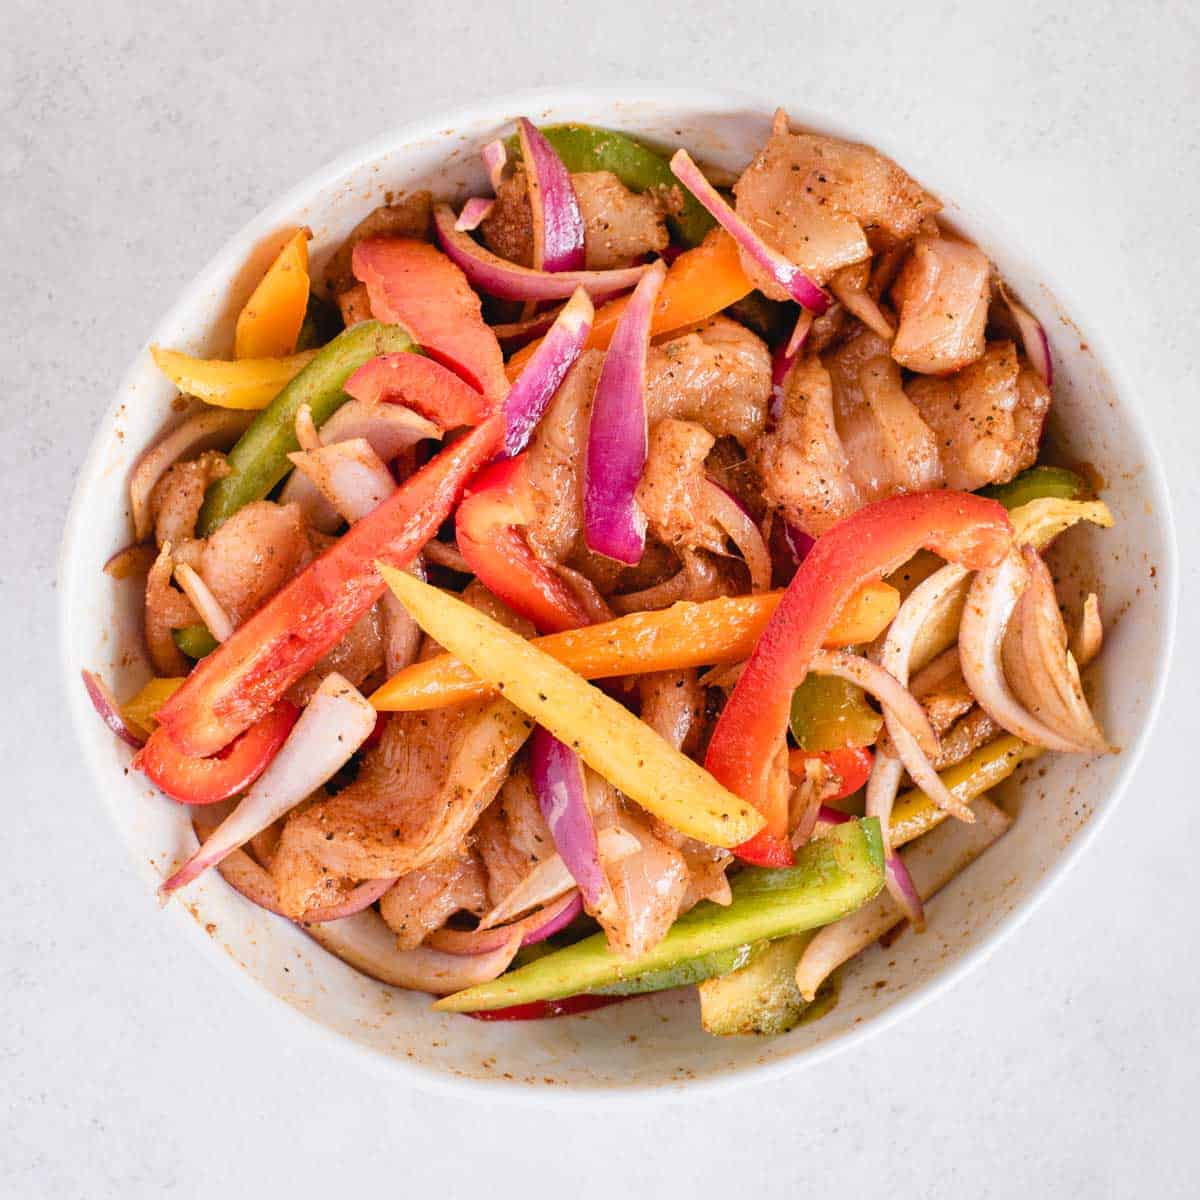 cut up raw peppers, red onion and chicken tossed in seasoning in a bowl